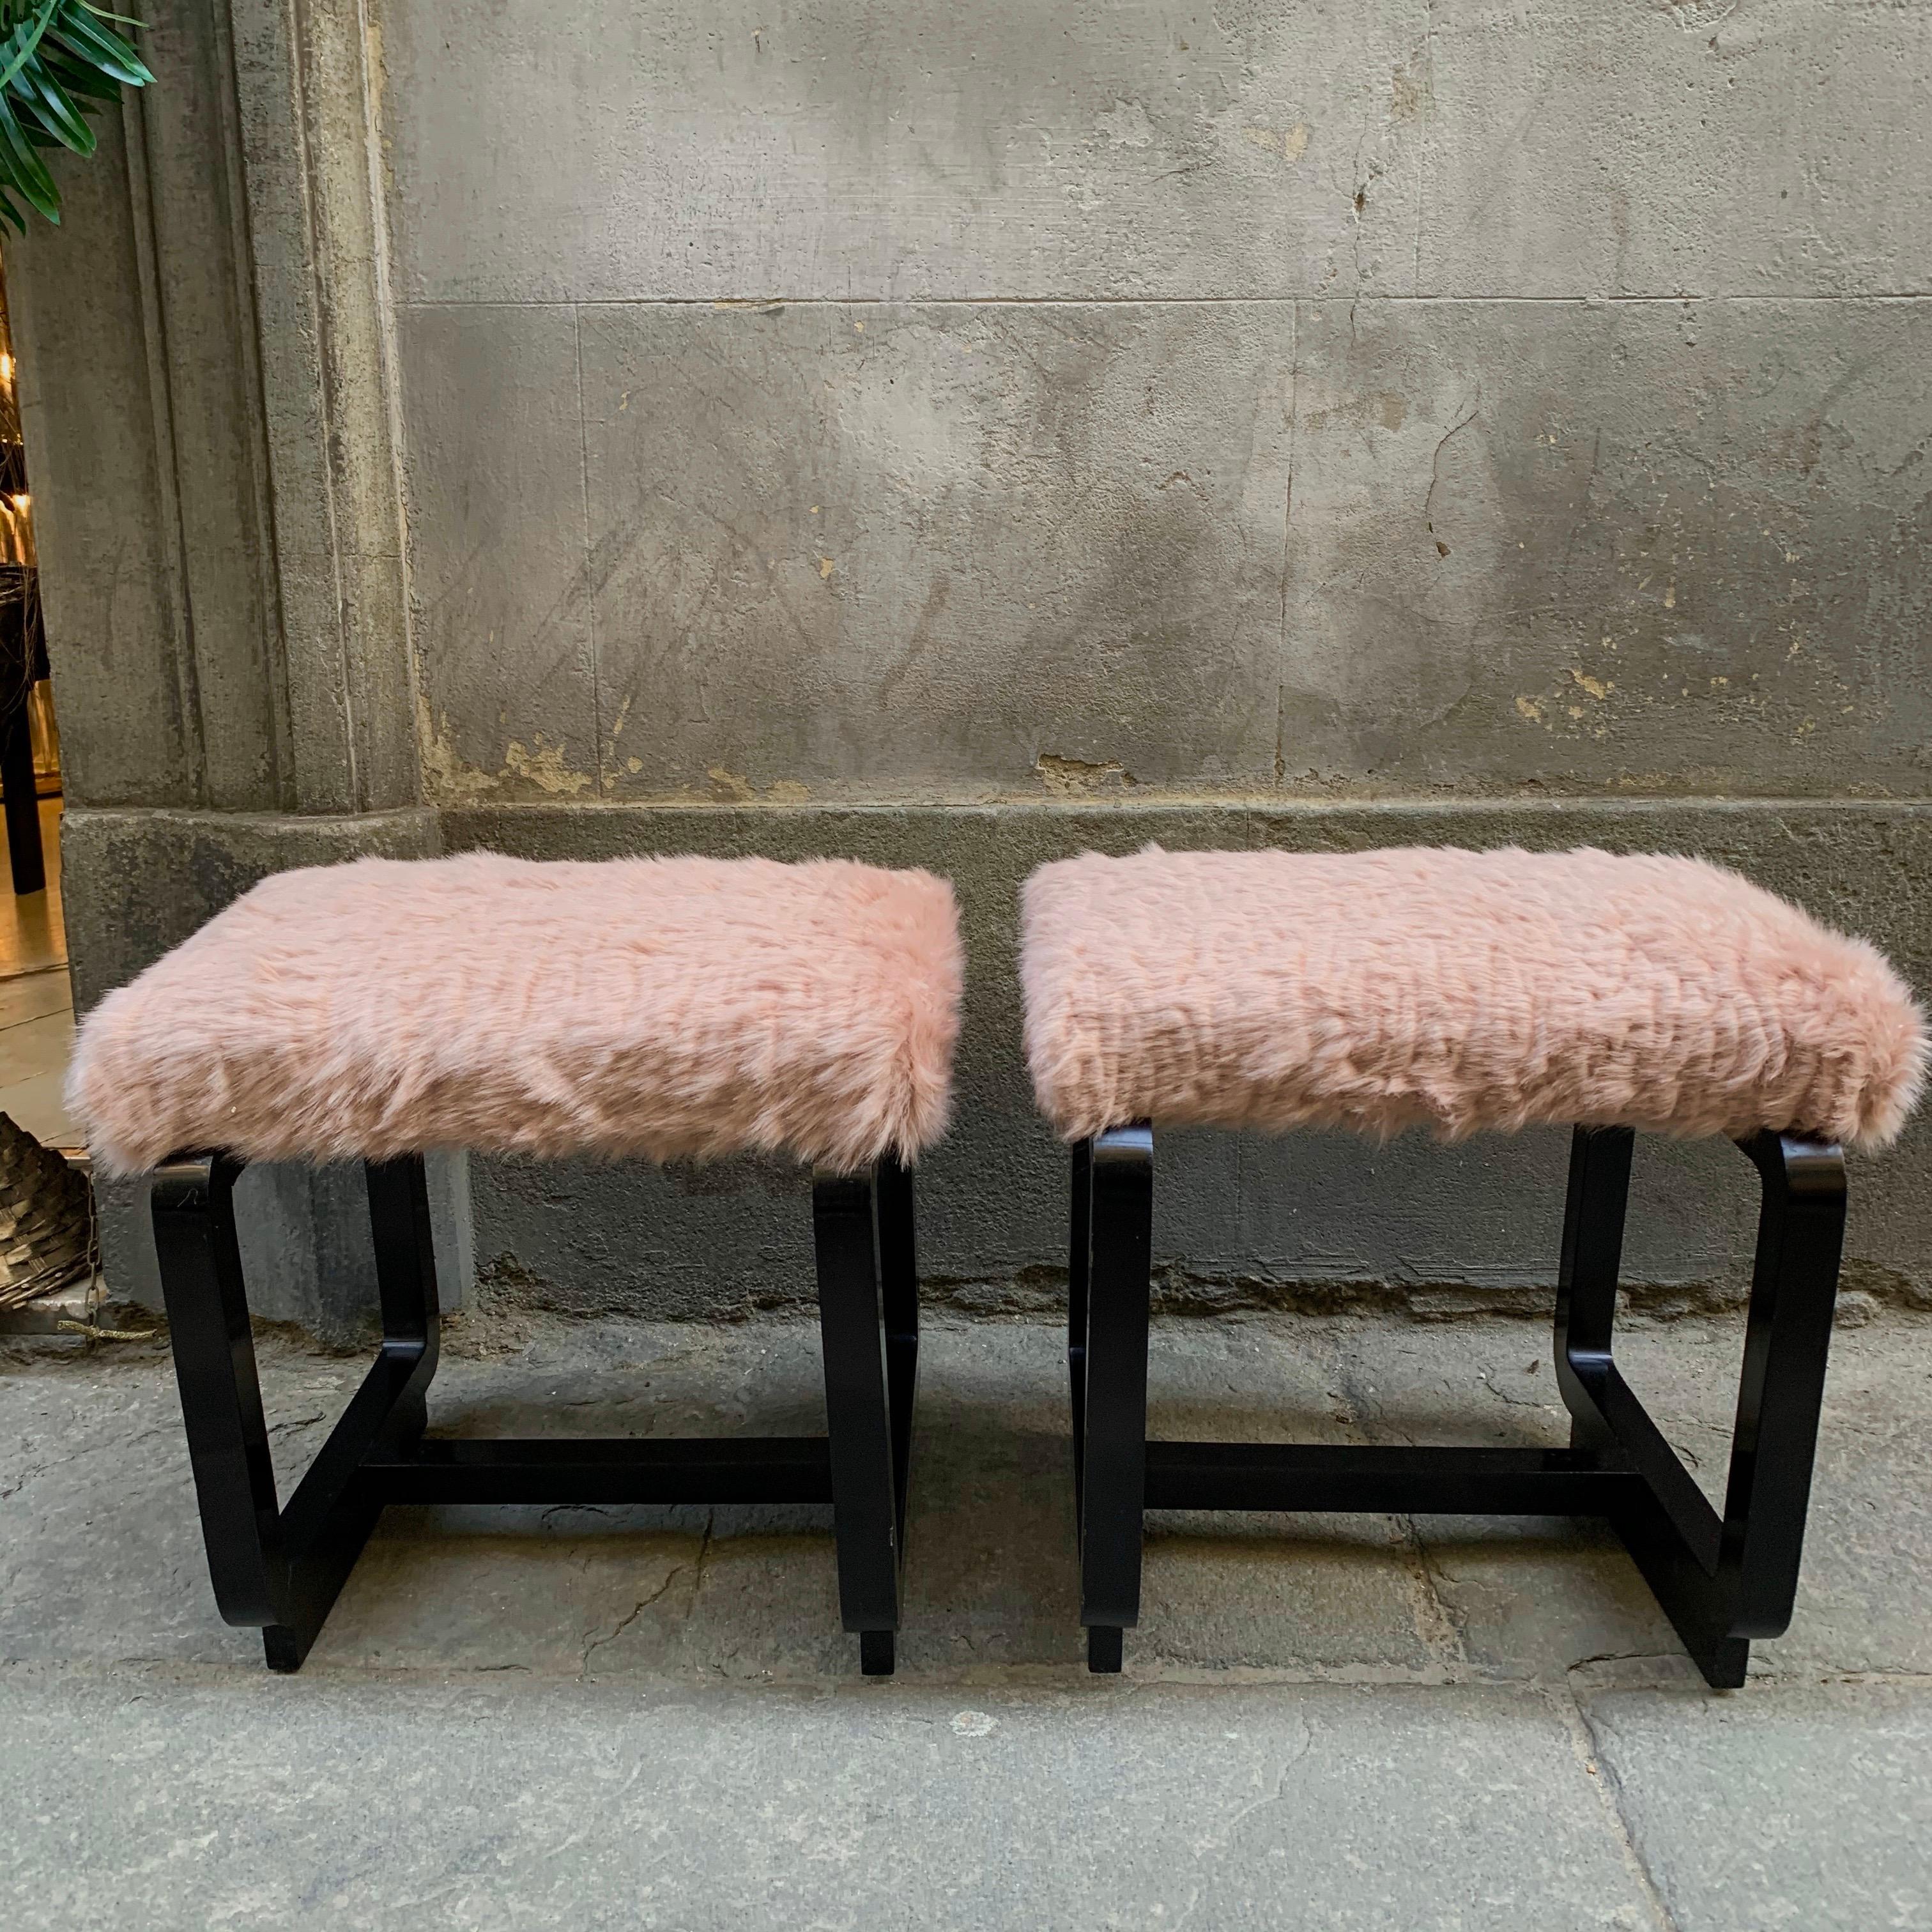 Pair of Art Deco benches in black lacquered wood and pale pink eco fur seats.
The faux fur has been newly upholstered.
 